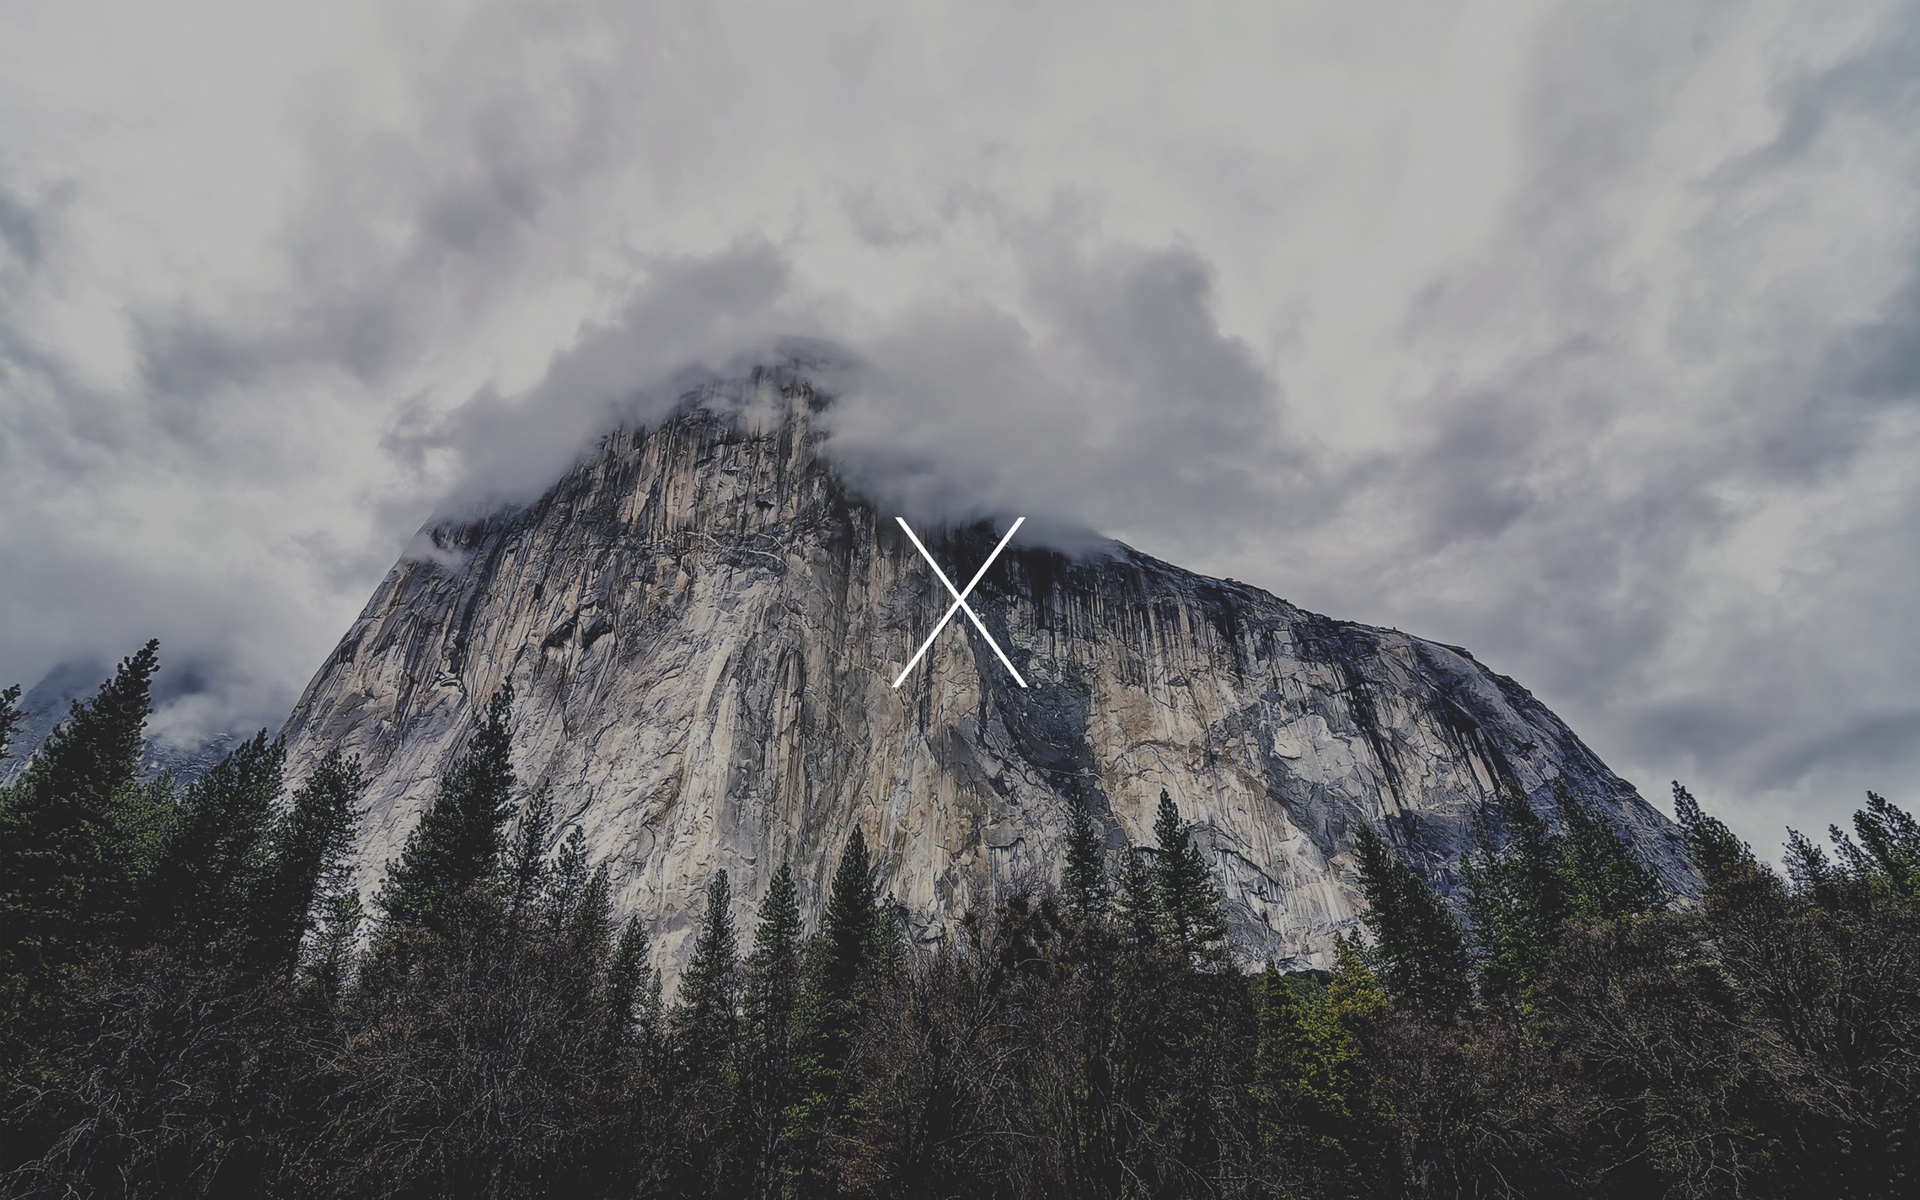  Blog Archive WWDC Wallpapers OS X 1010 Yosemite iOS 8 Images